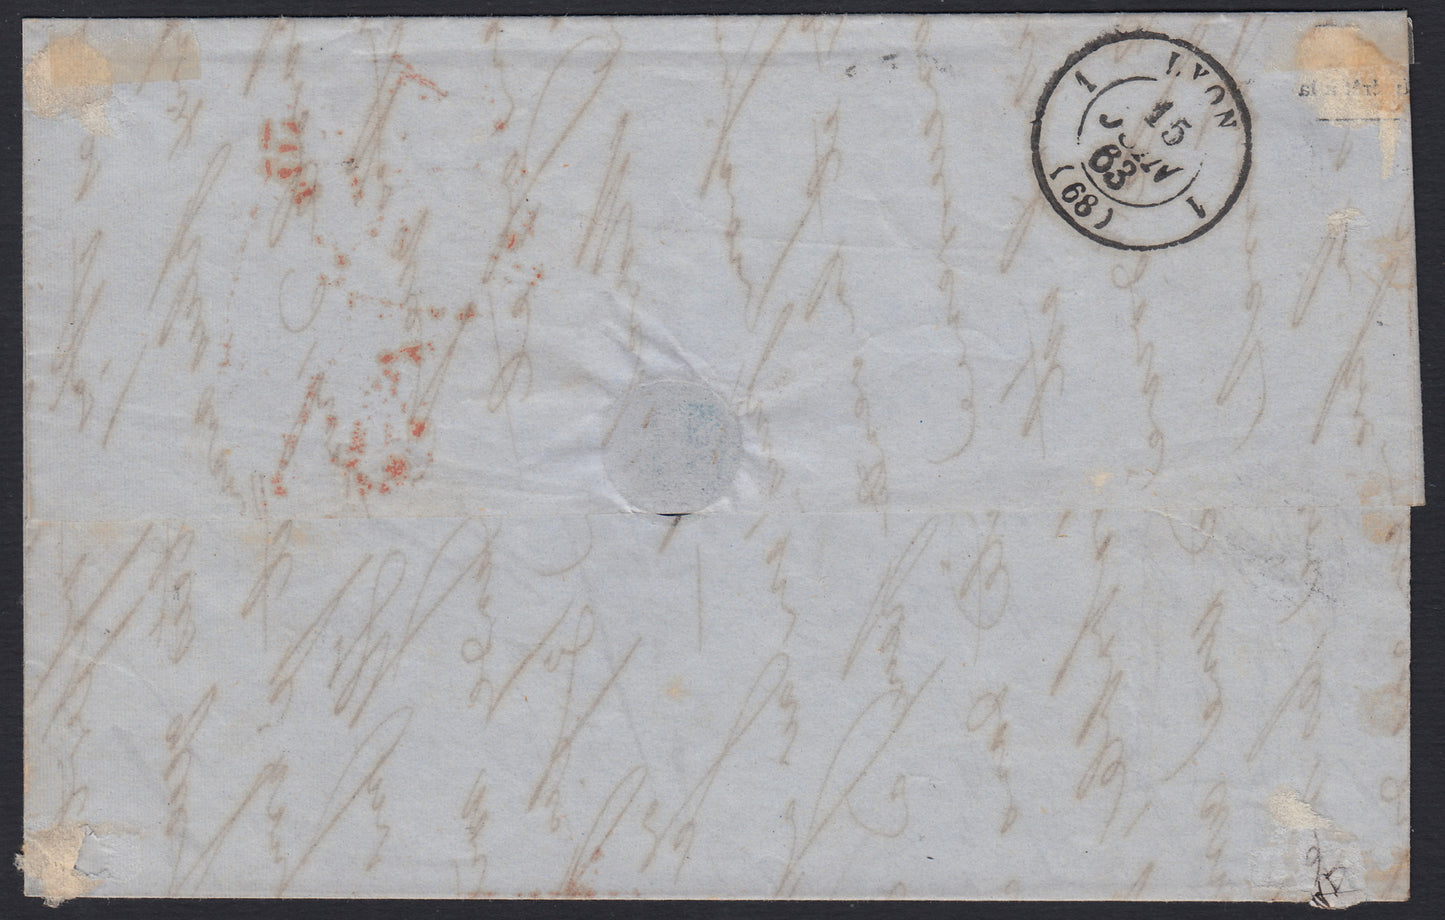 260 - 1863 - IV issue, Letter sent from Livorno to Lyon 12/6/63 franked with c. 40 intense carmine red edition 1861 (16D, Rattone n. 41d)